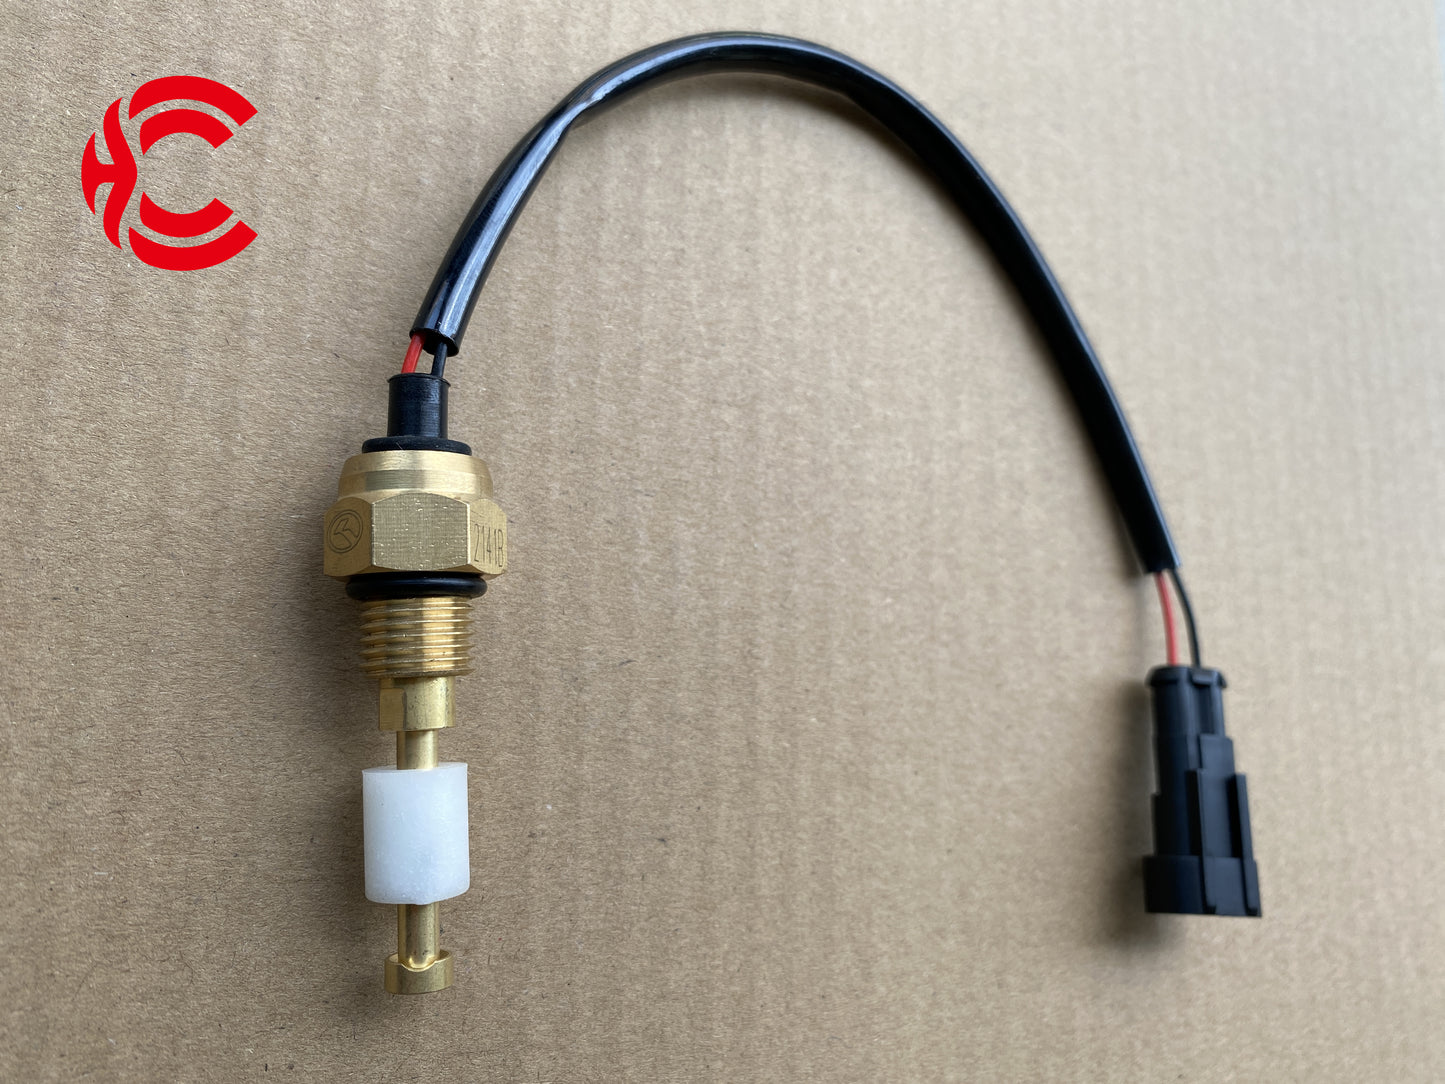 OEM: SG2141BMaterial: ABS metalColor: Black GoldenOrigin: Made in ChinaWeight: 50gPacking List: 1* Coolant Level Alarm Sensor More ServiceWe can provide OEM Manufacturing serviceWe can Be your one-step solution for Auto PartsWe can provide technical scheme for you Feel Free to Contact Us, We will get back to you as soon as possible.